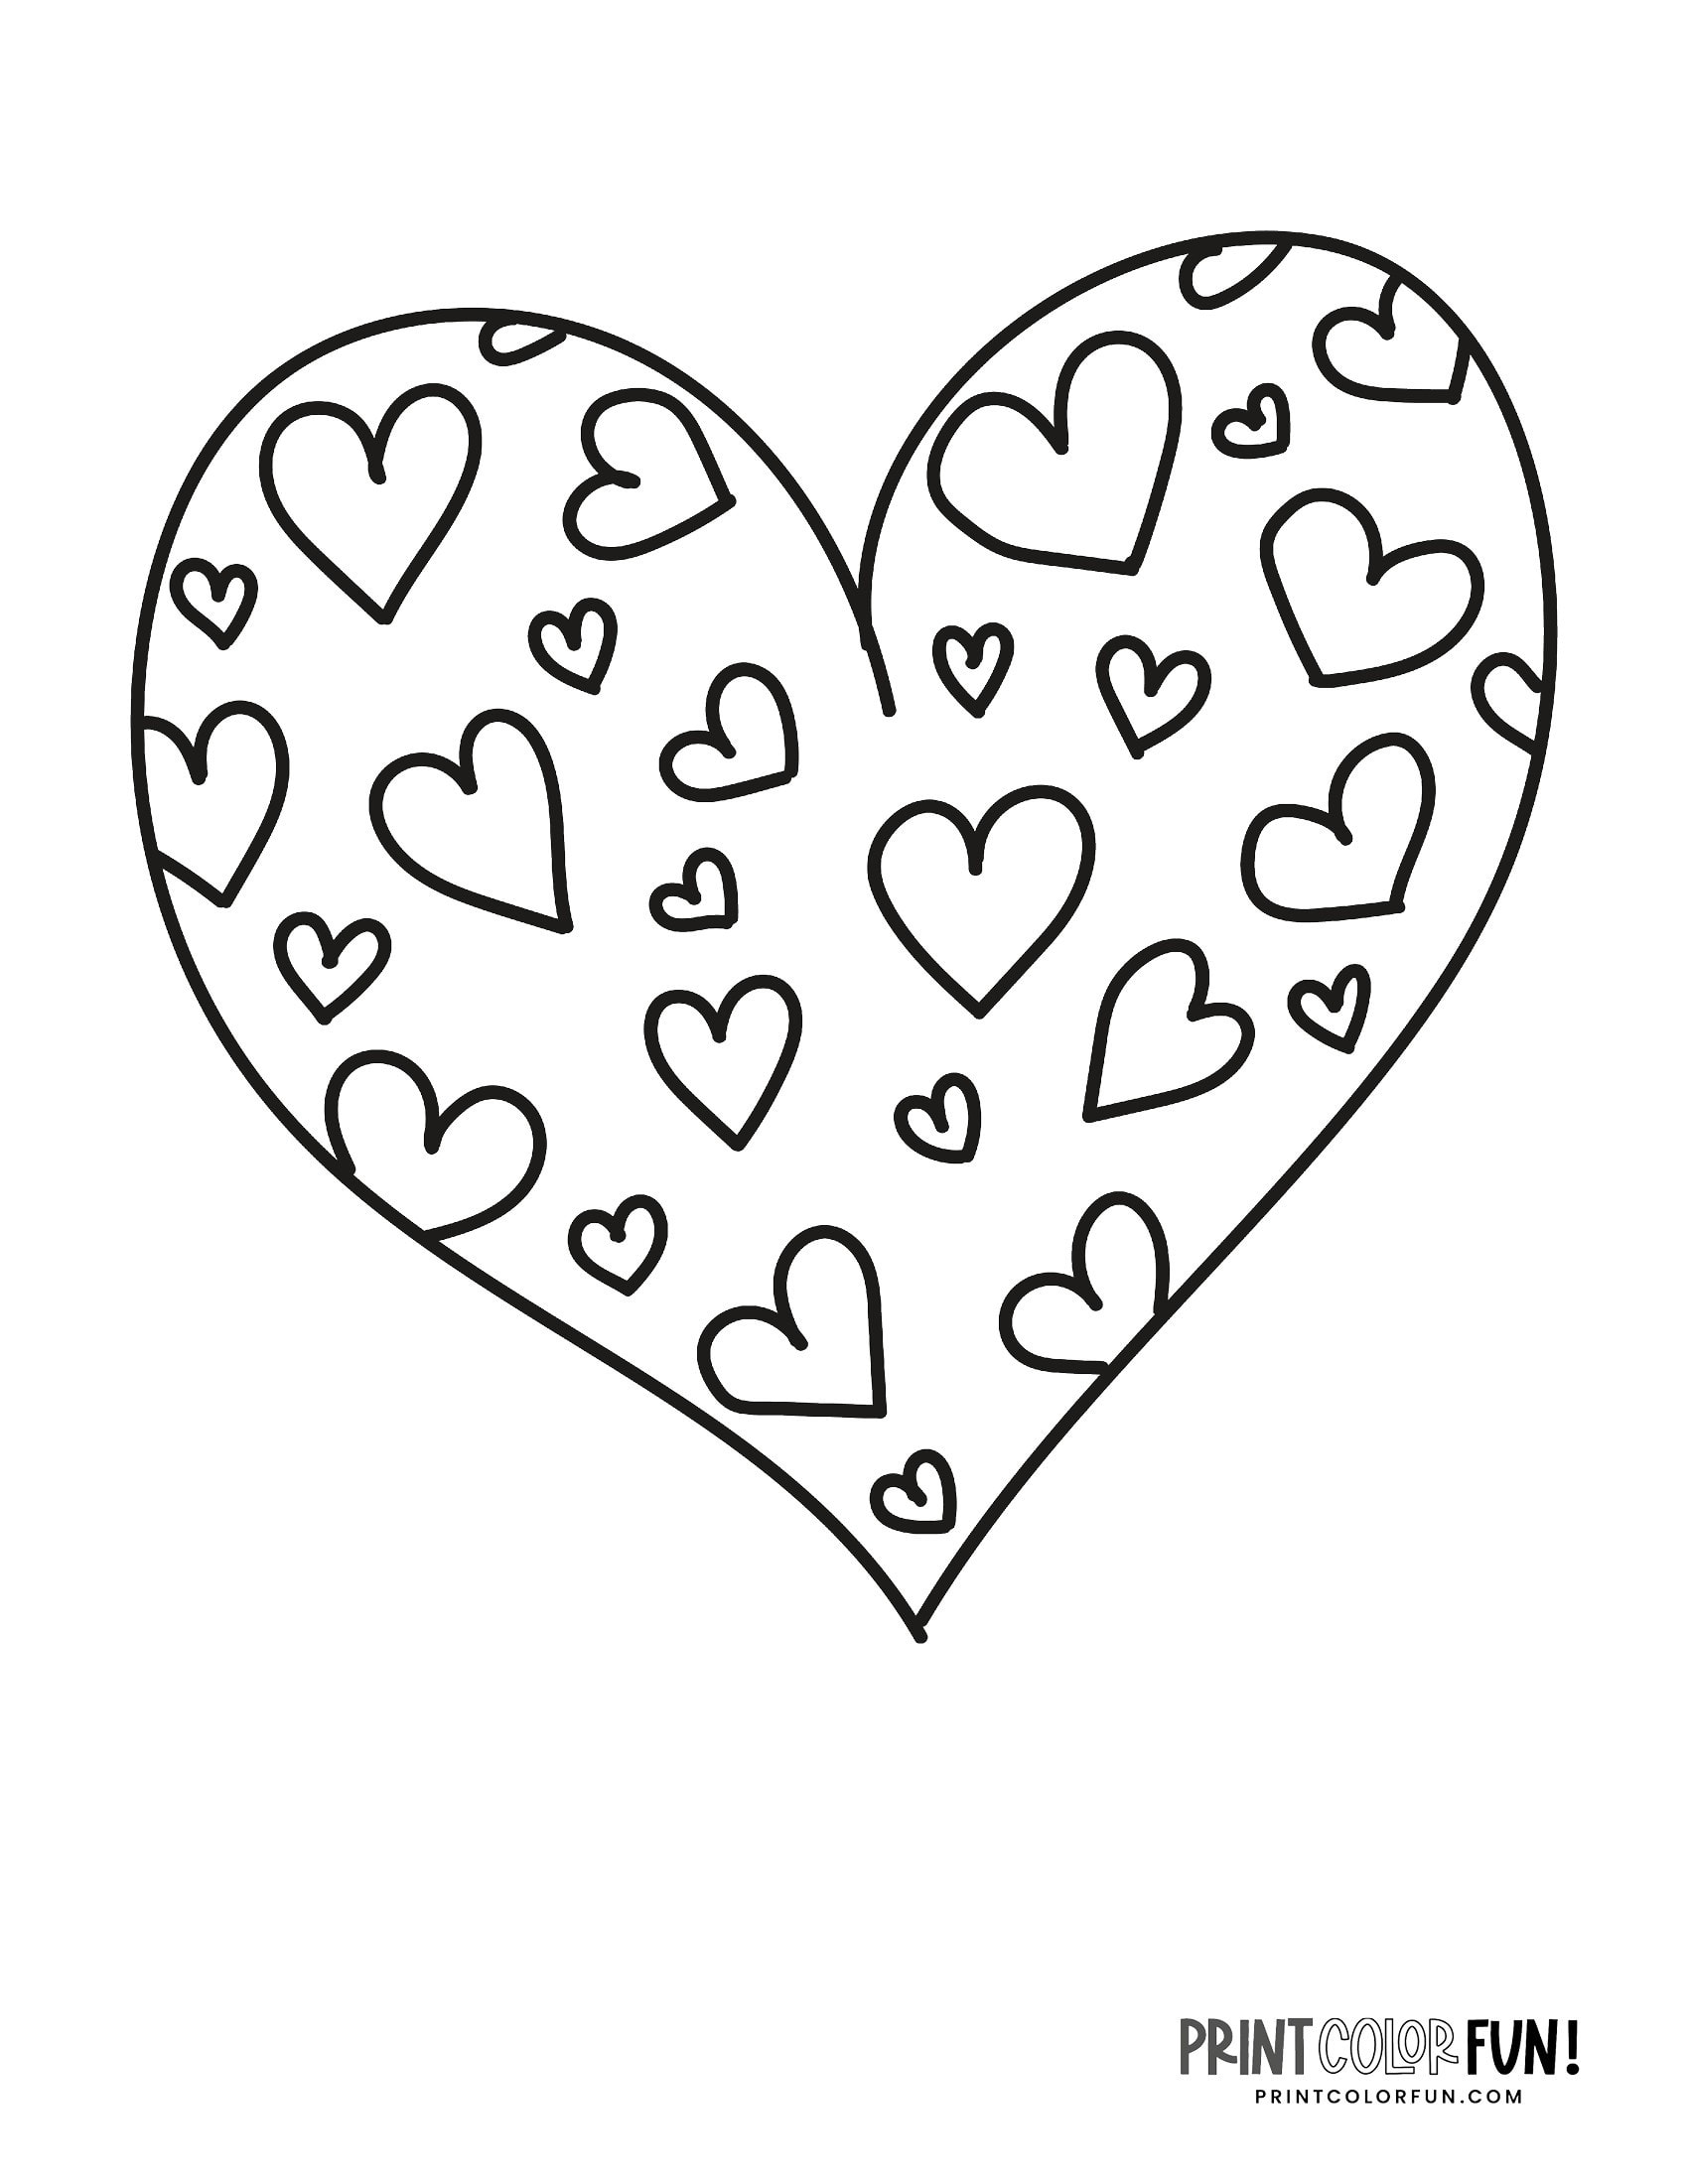 100+ Heart Coloring Pages: A Huge Collection Of Free Valentine'S Day